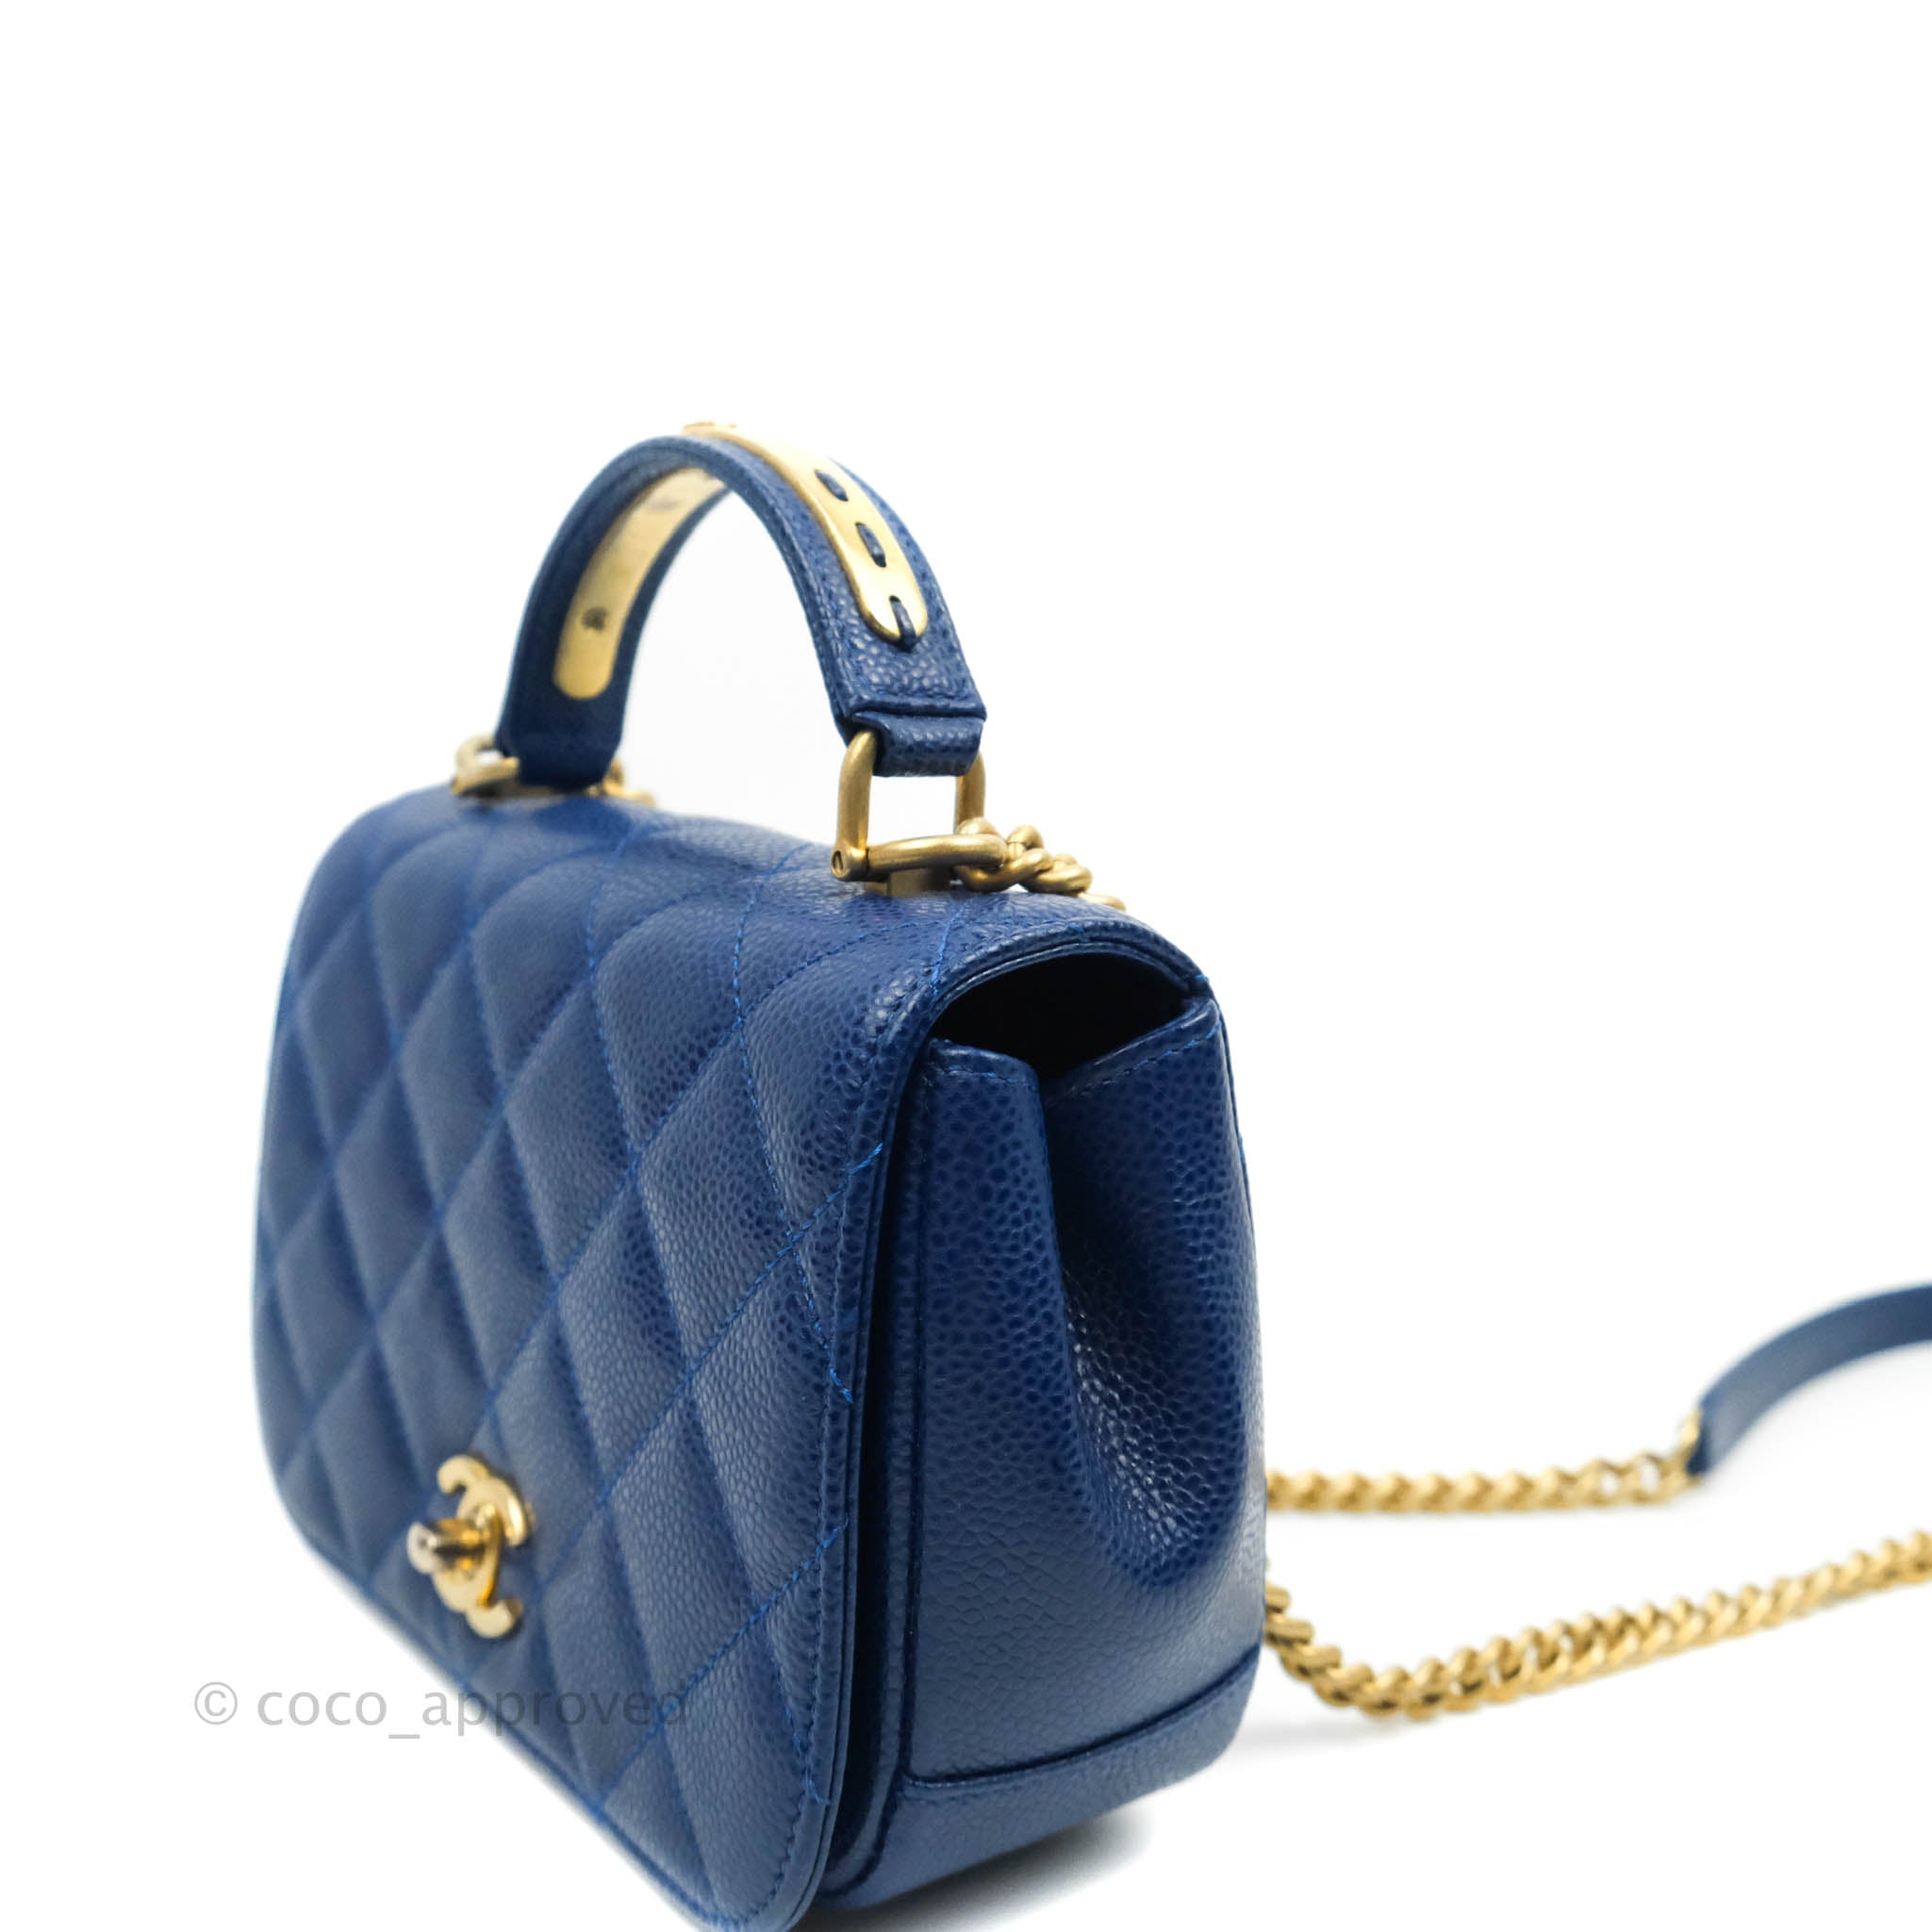 Chanel Flap Bag with Top Handle Mini Baby Blue